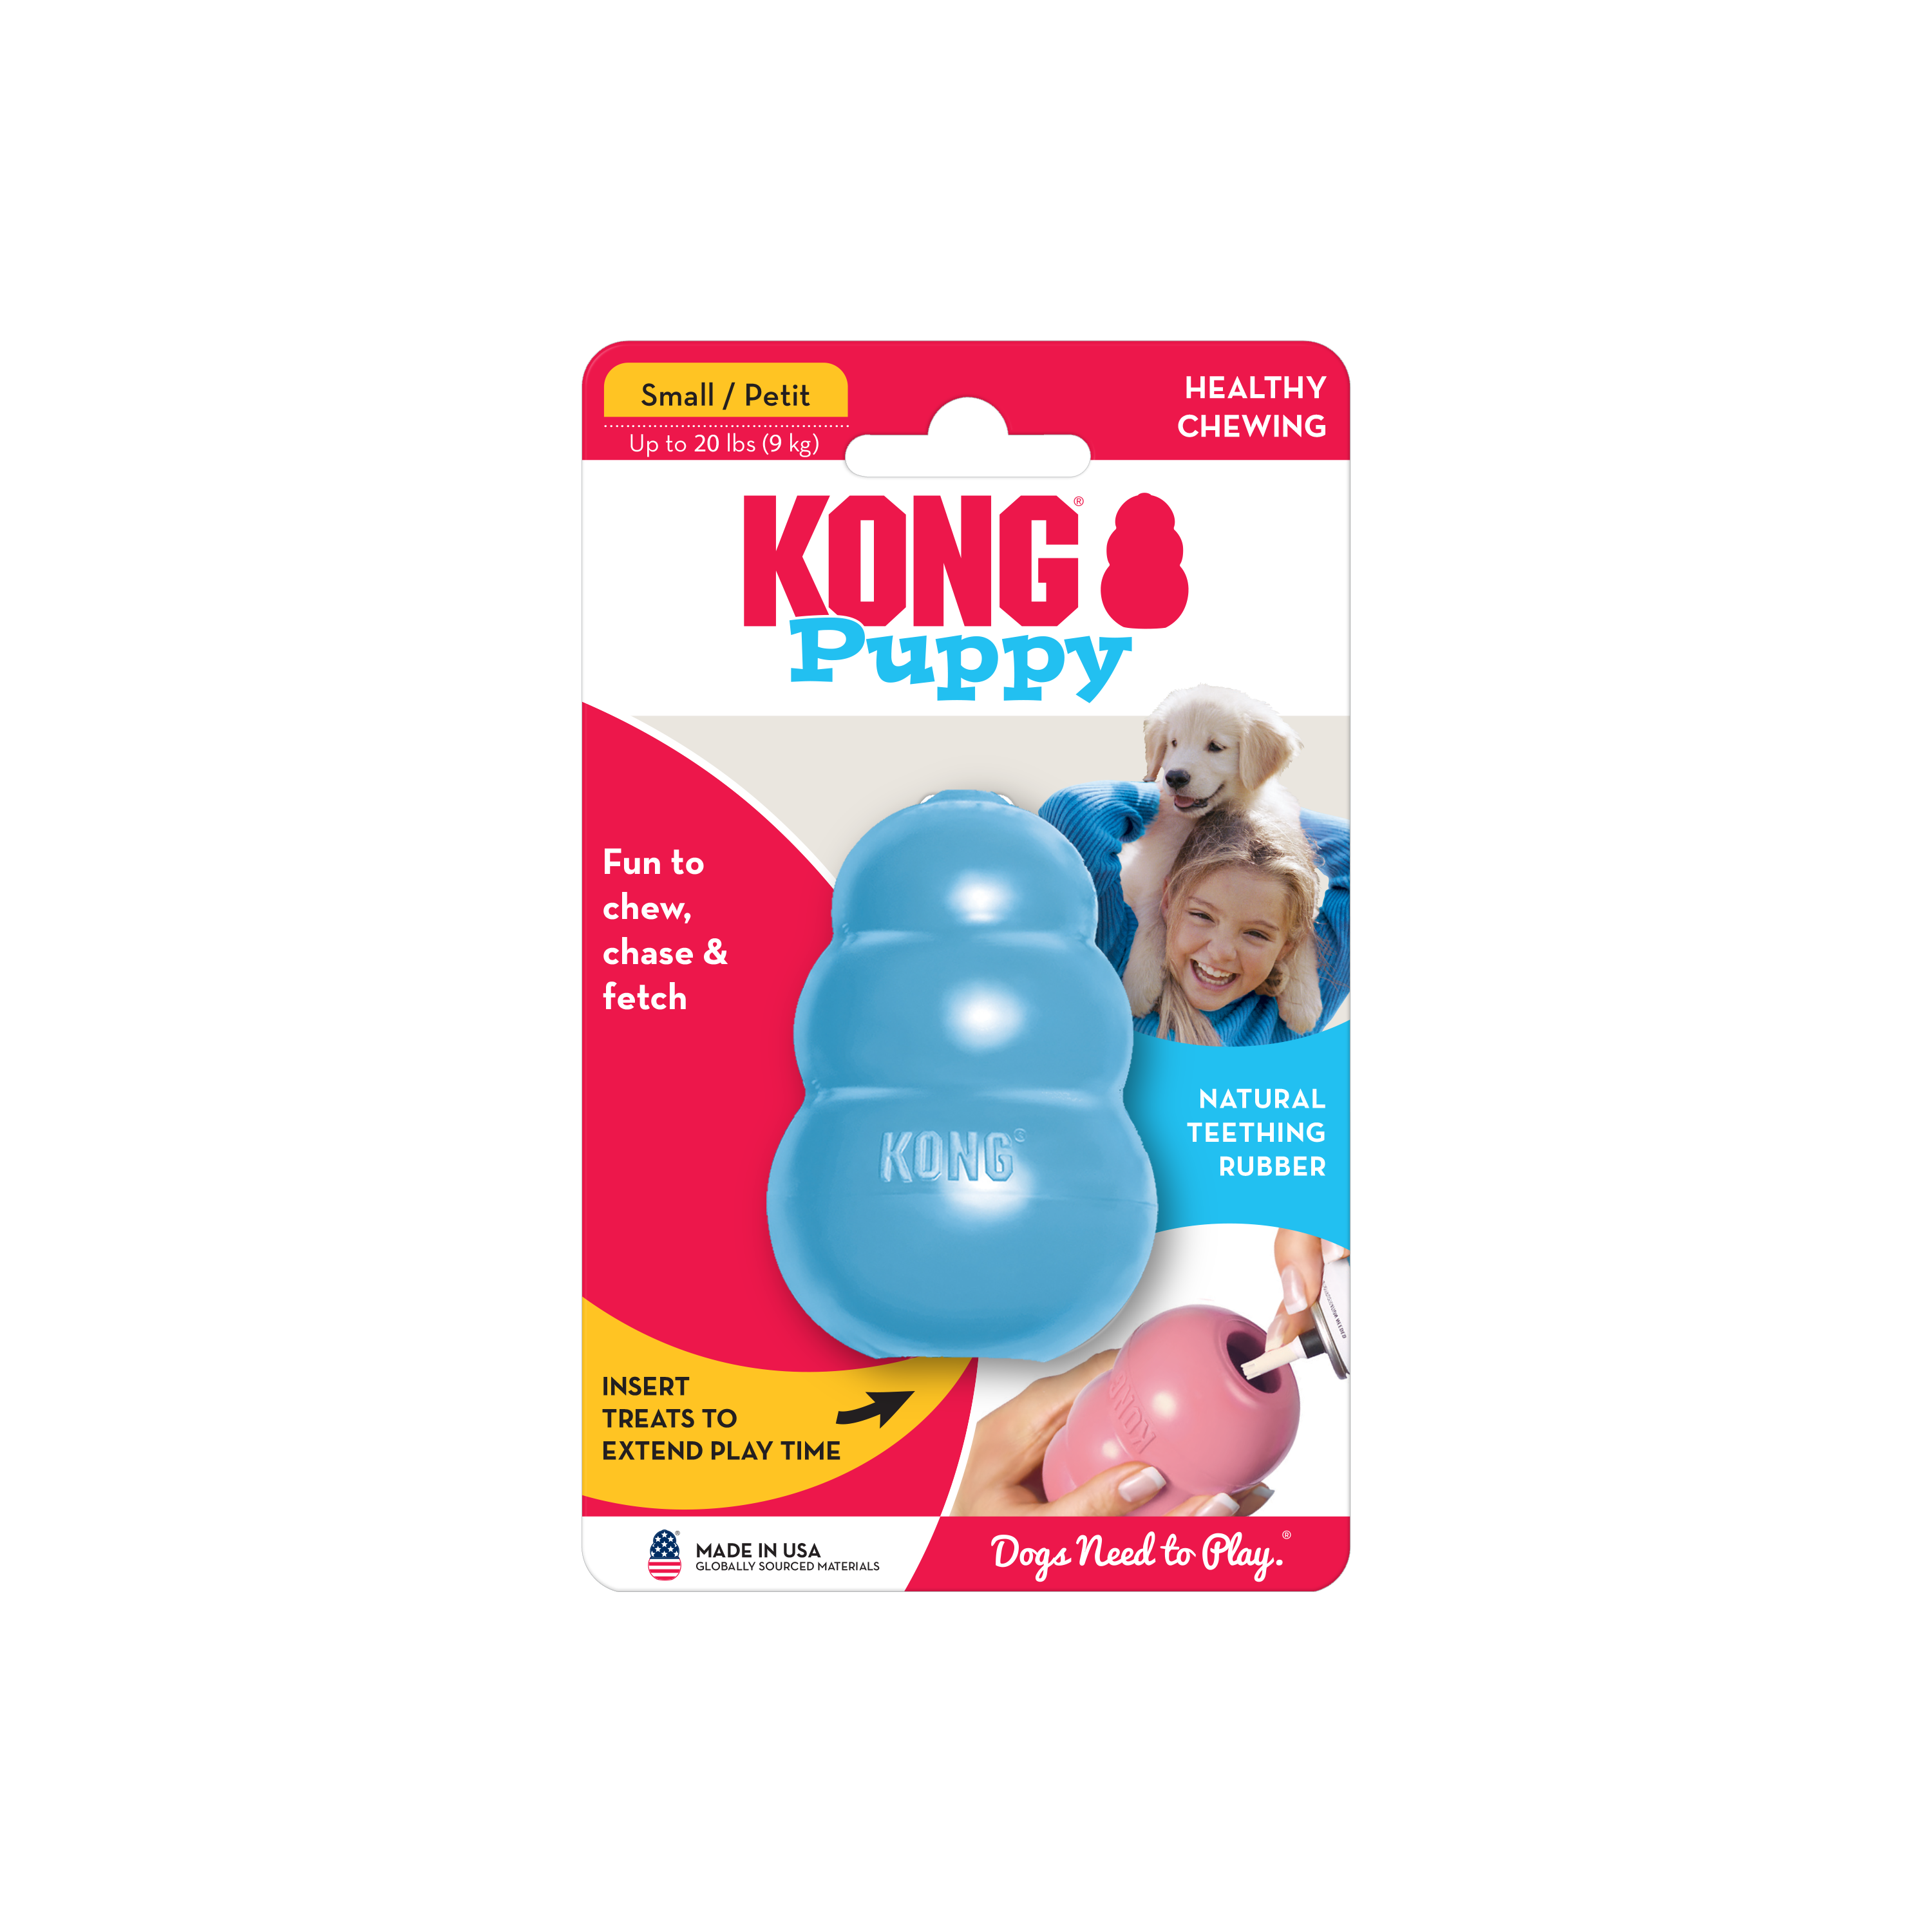 KONG Puppy onpack imagen del producto